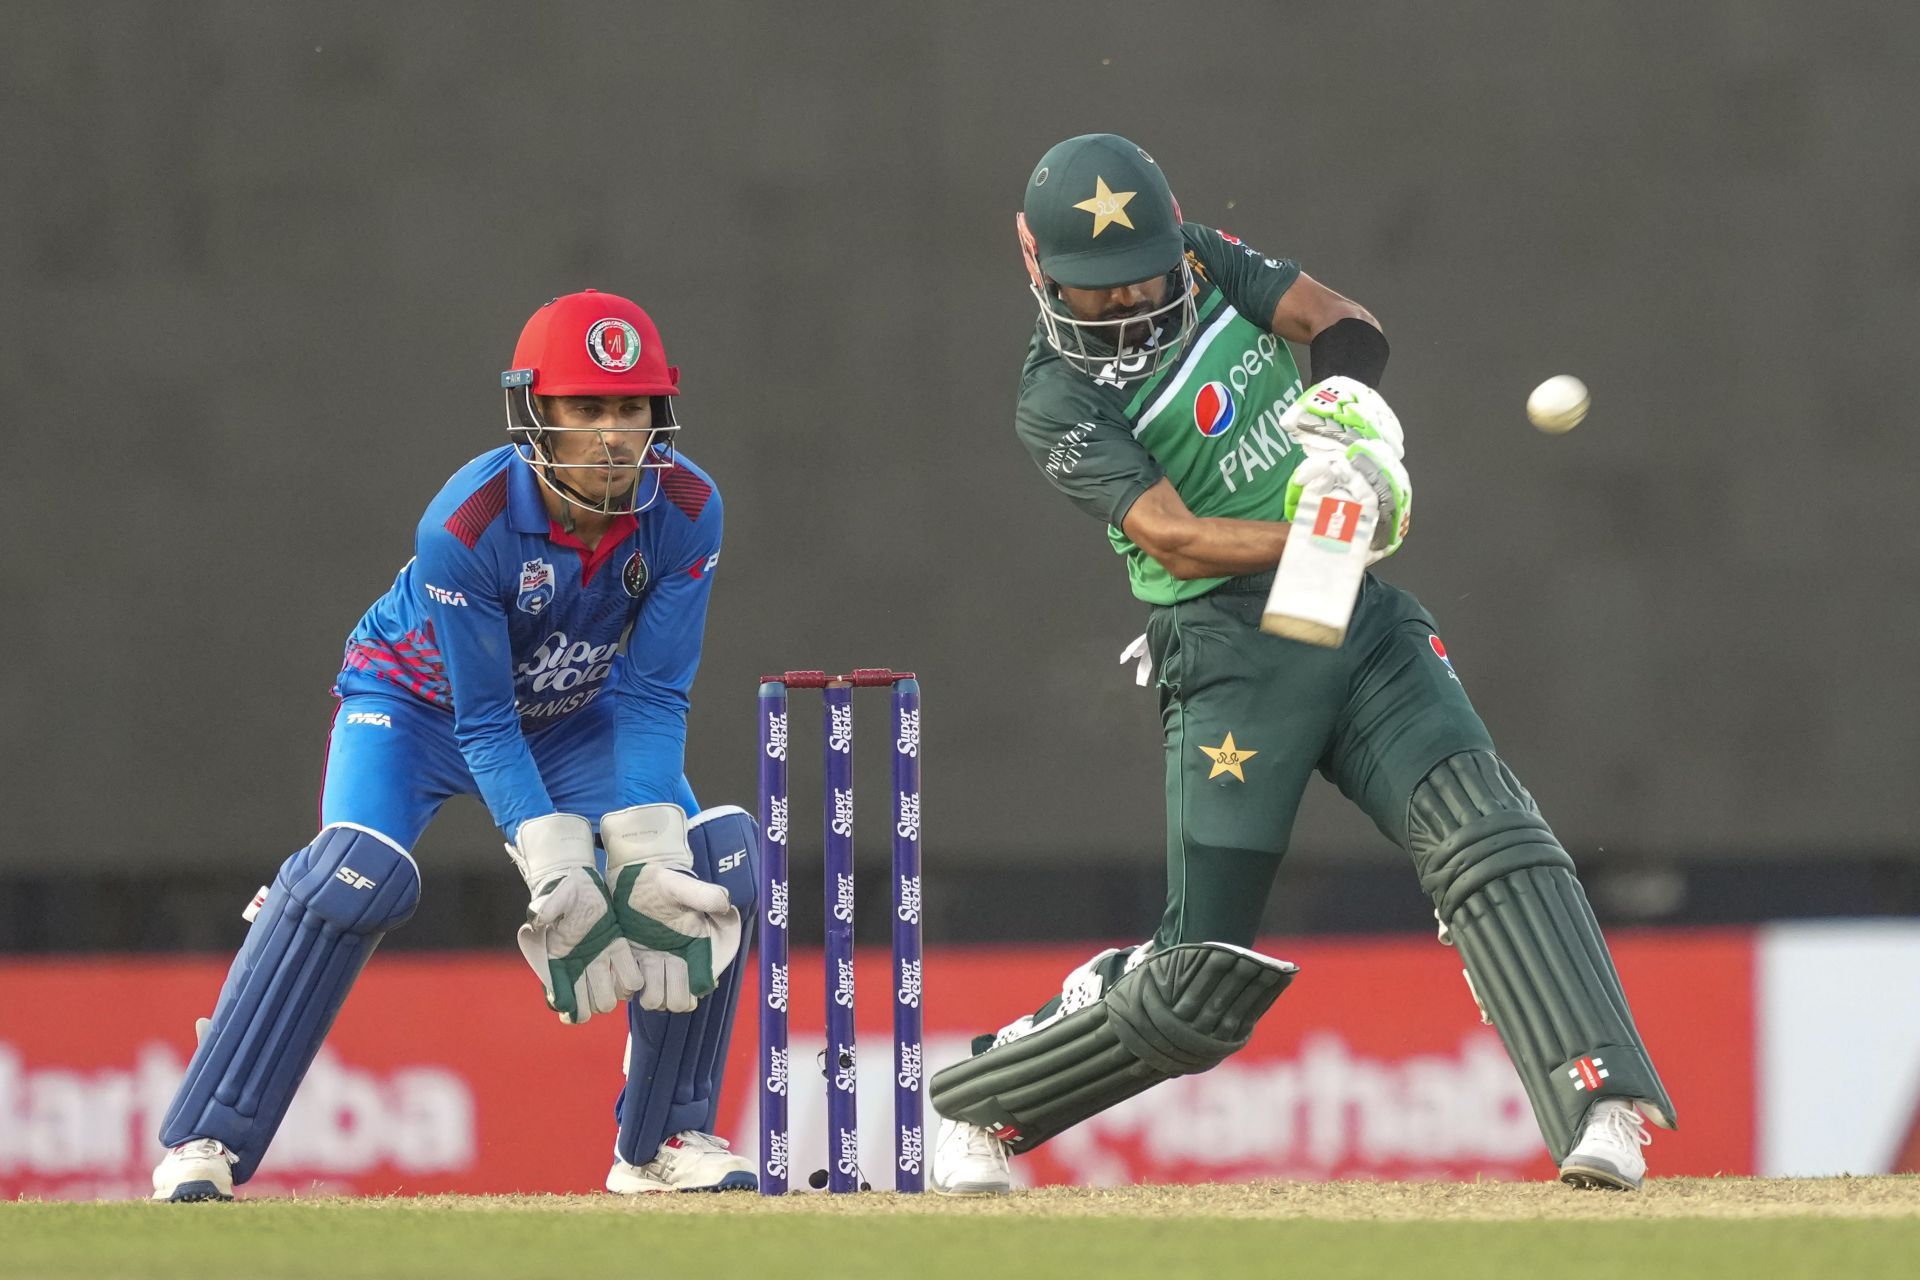 Babar Azam will be key to their batting order